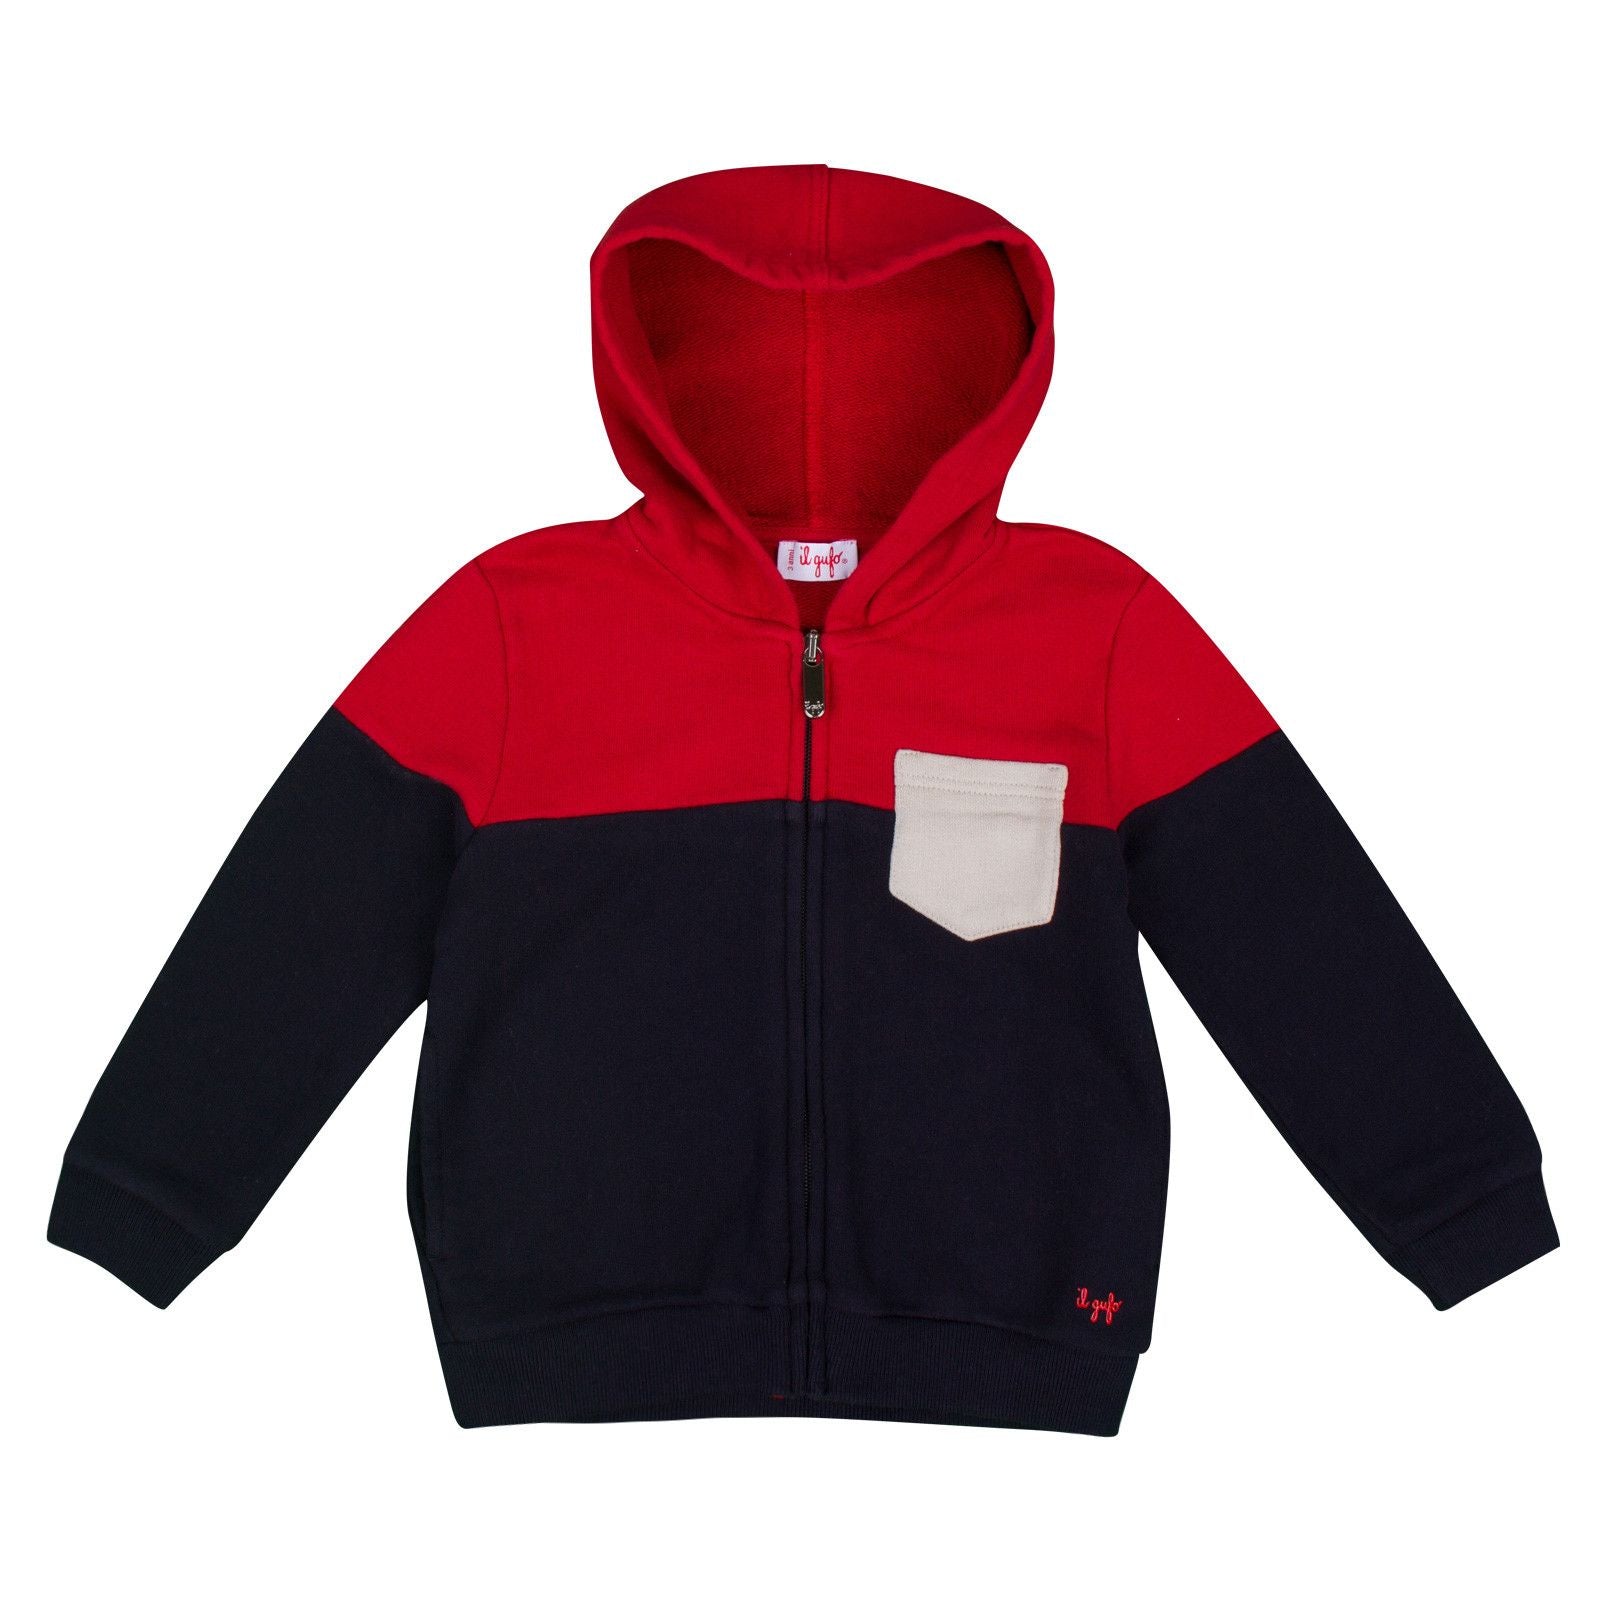 Boys Navy Blue&Red Ribbed Knited Trims Hooded Jacket - CÉMAROSE | Children's Fashion Store - 1